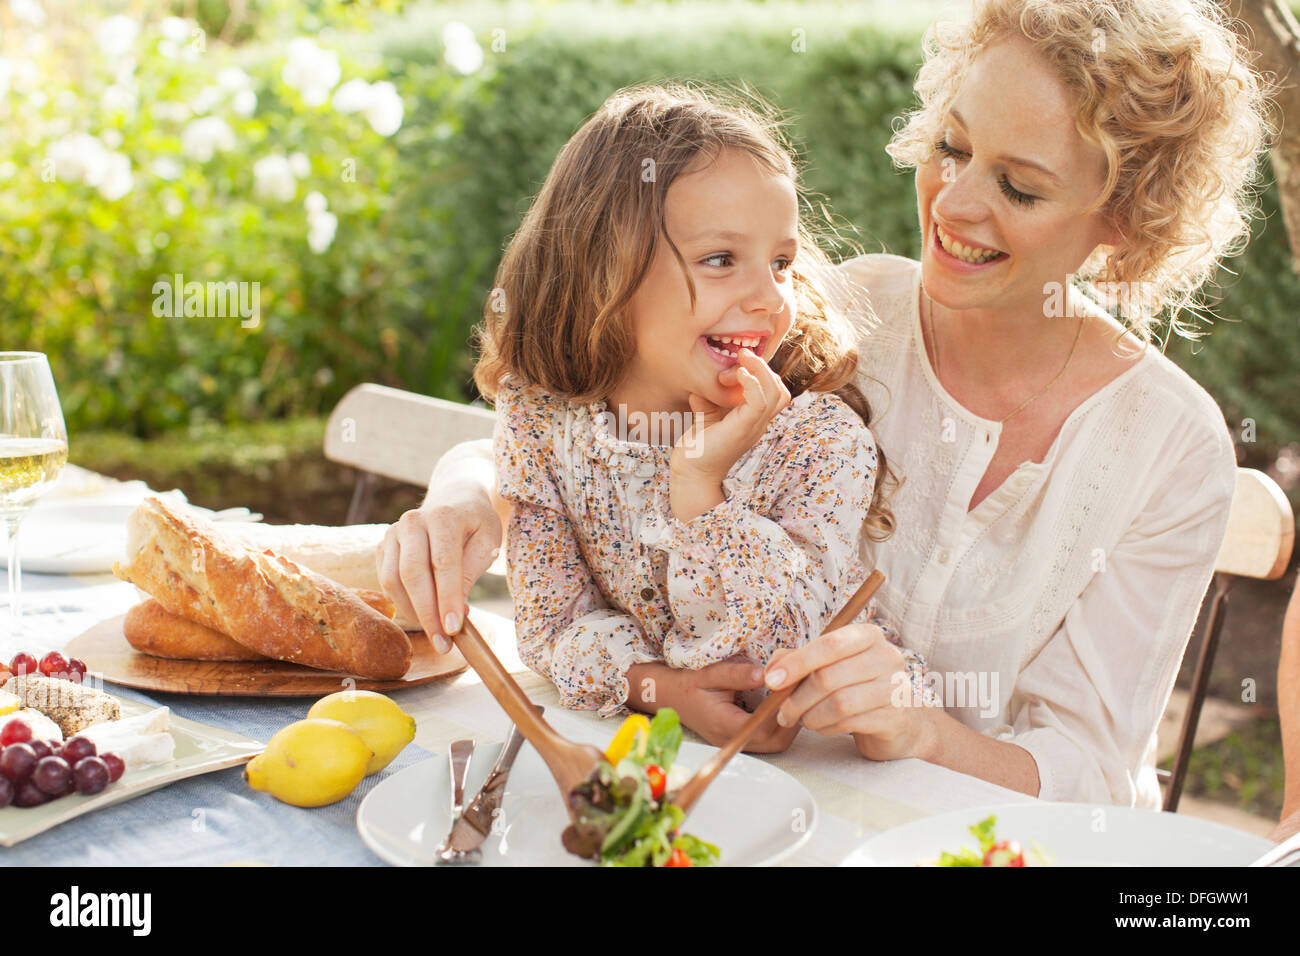 Mother and daughter eating in garden Stock Photo